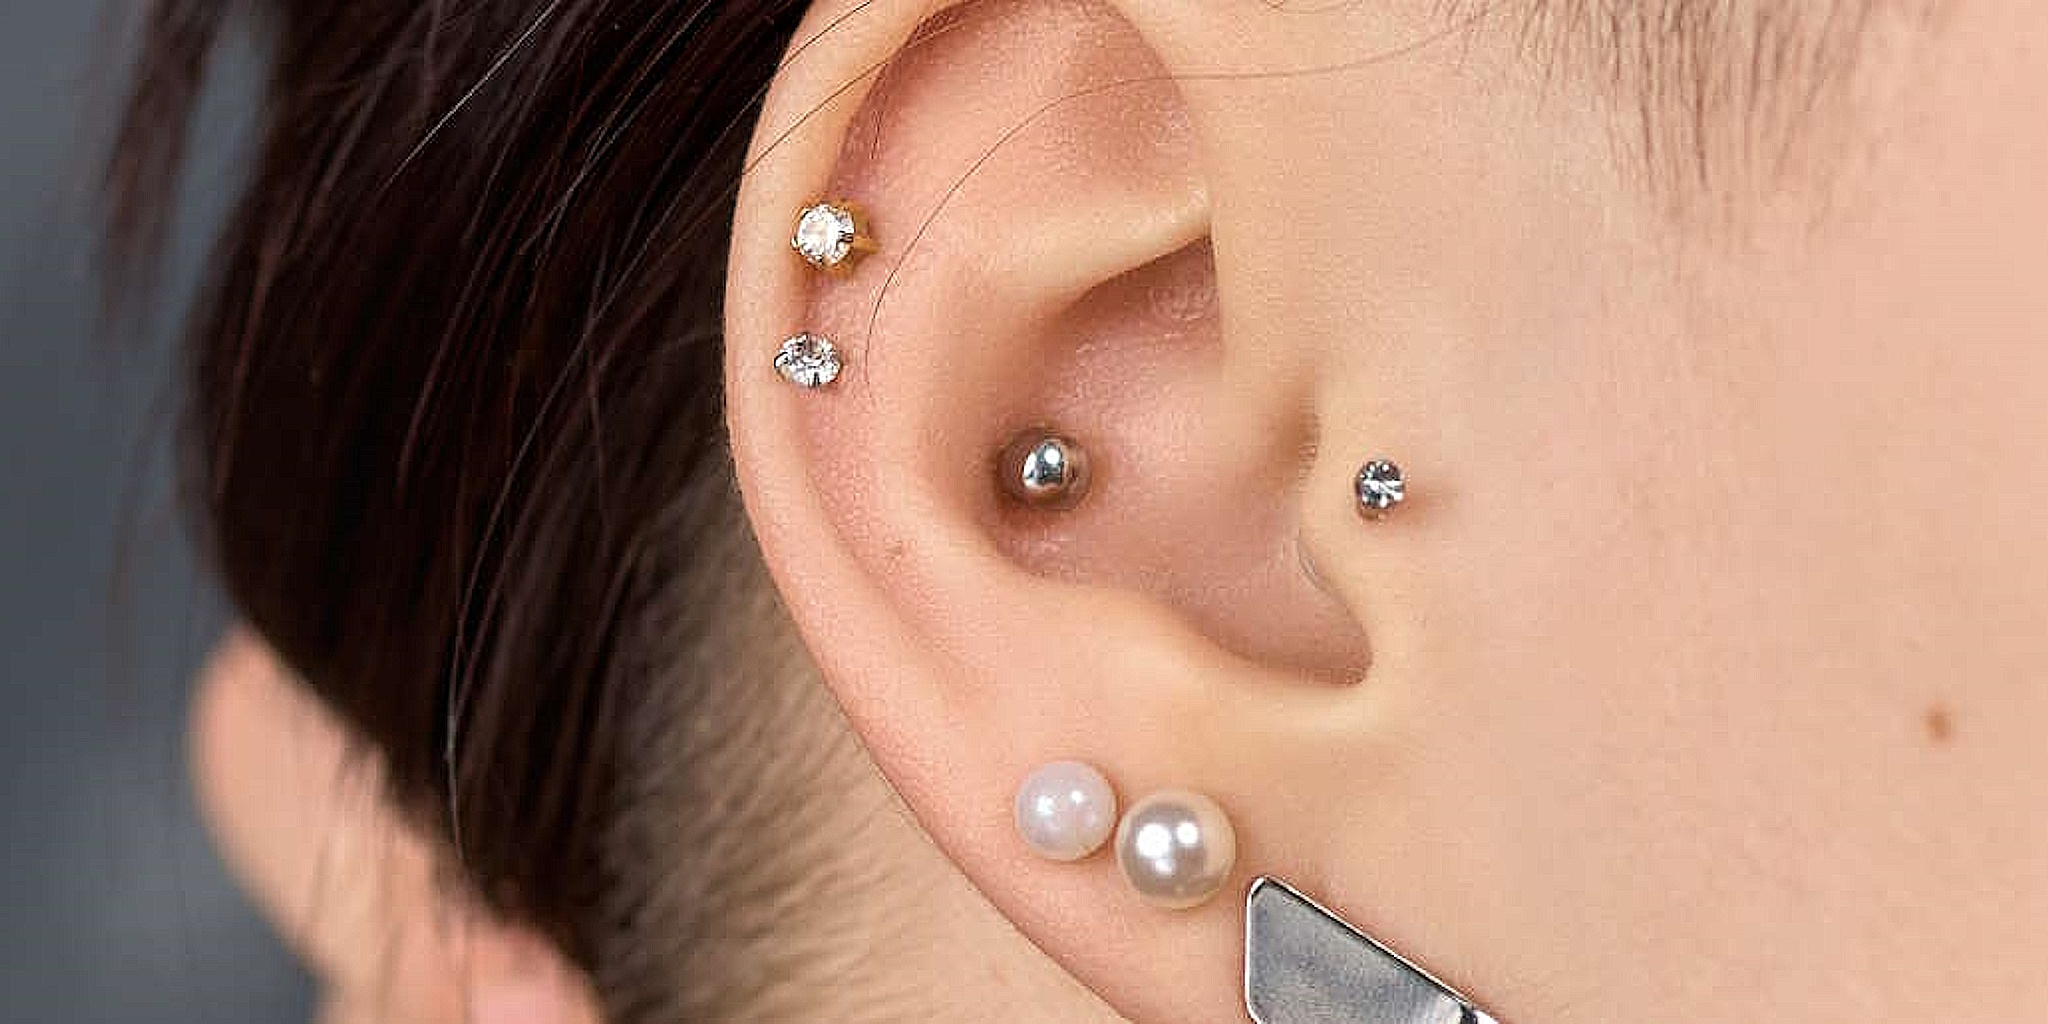 A woman with several piercings including an inner conch positioned in the center.